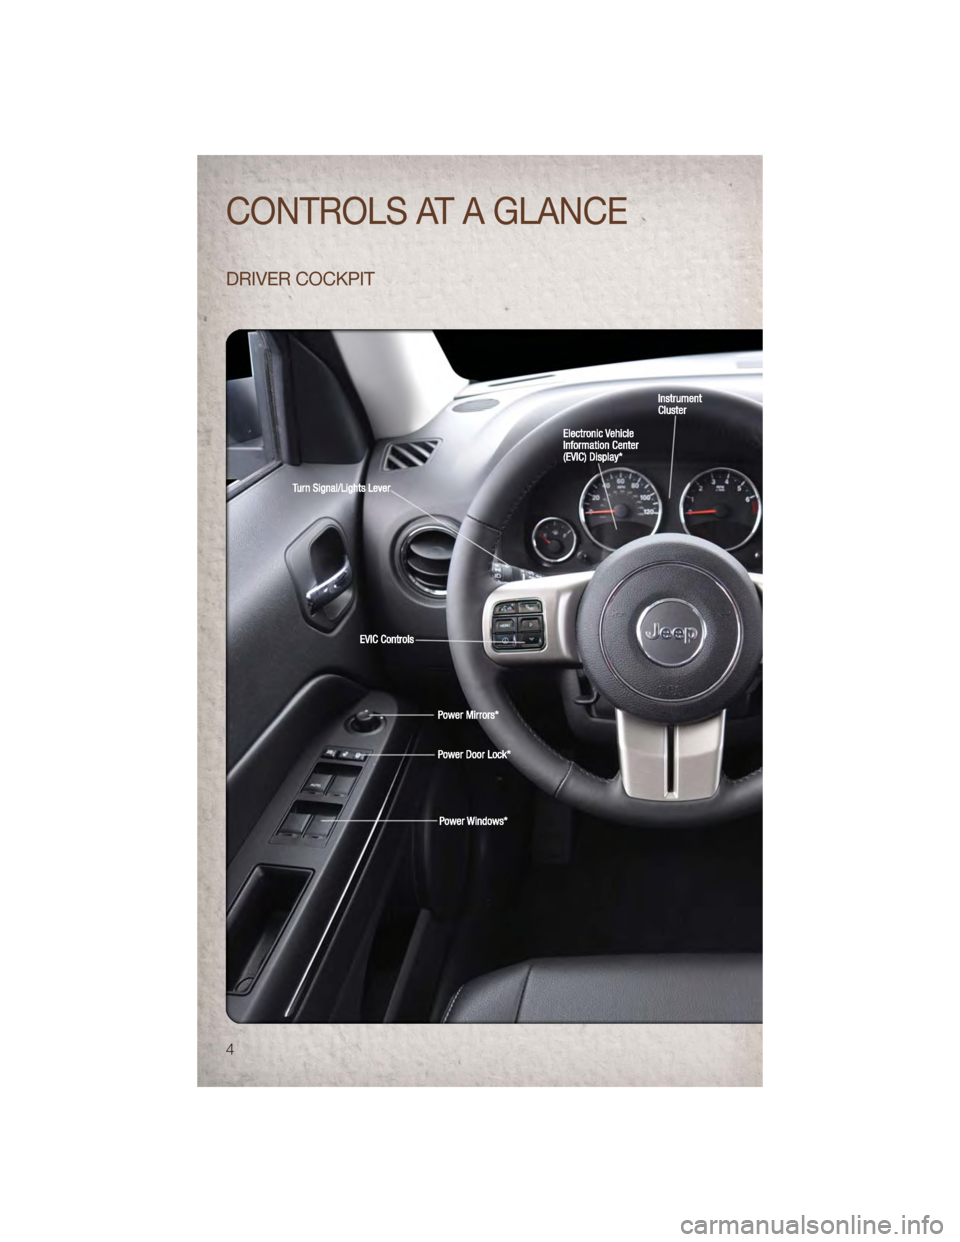 JEEP PATRIOT 2011 1.G User Guide DRIVER COCKPIT
CONTROLS AT A GLANCE
4 